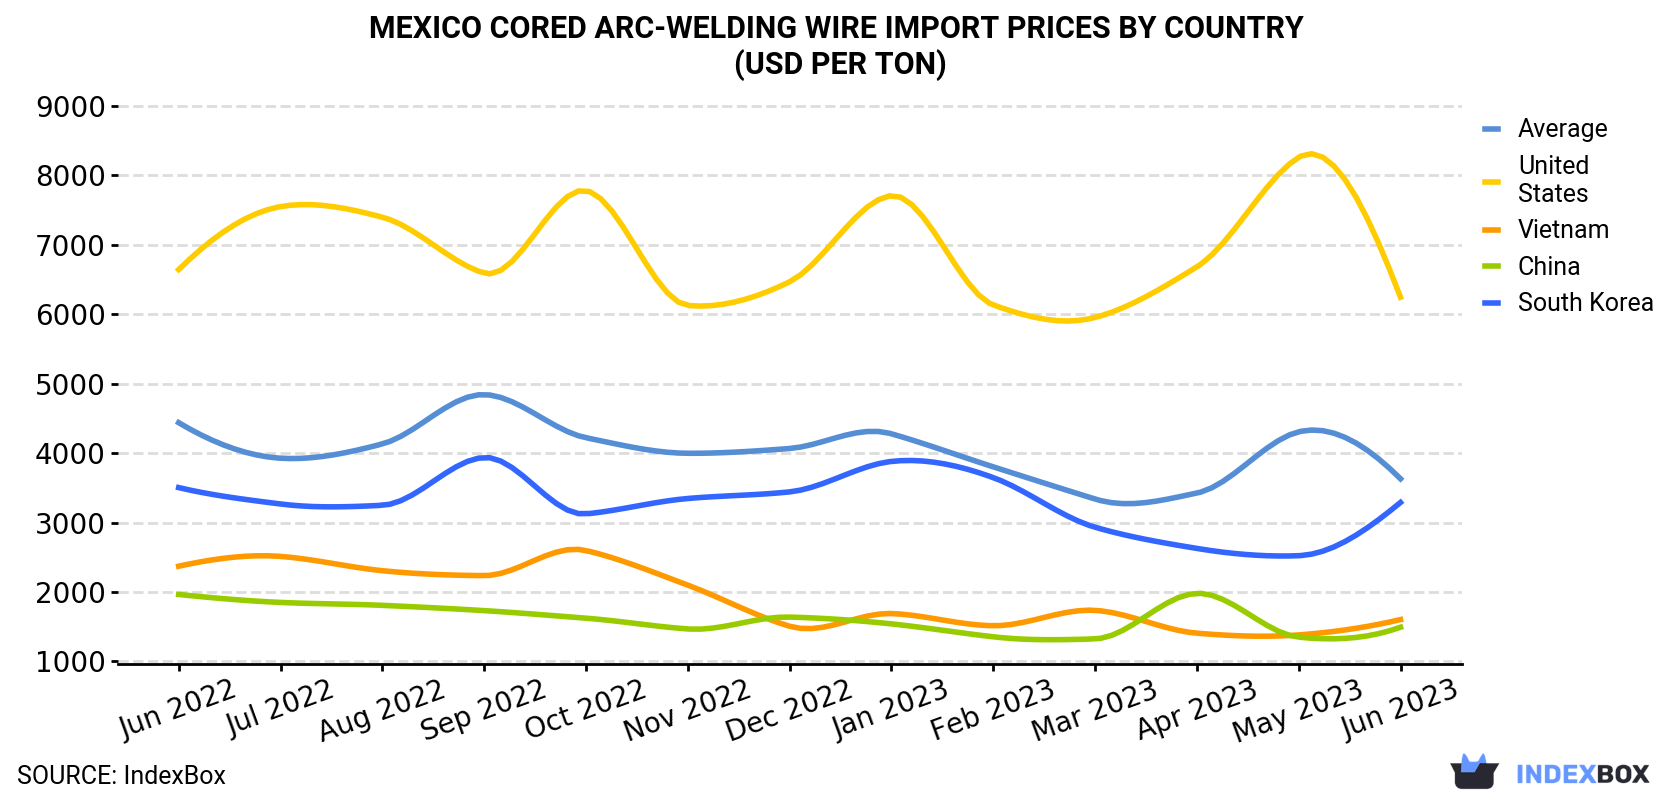 Mexico Cored Arc-Welding Wire Import Prices By Country (USD Per Ton)